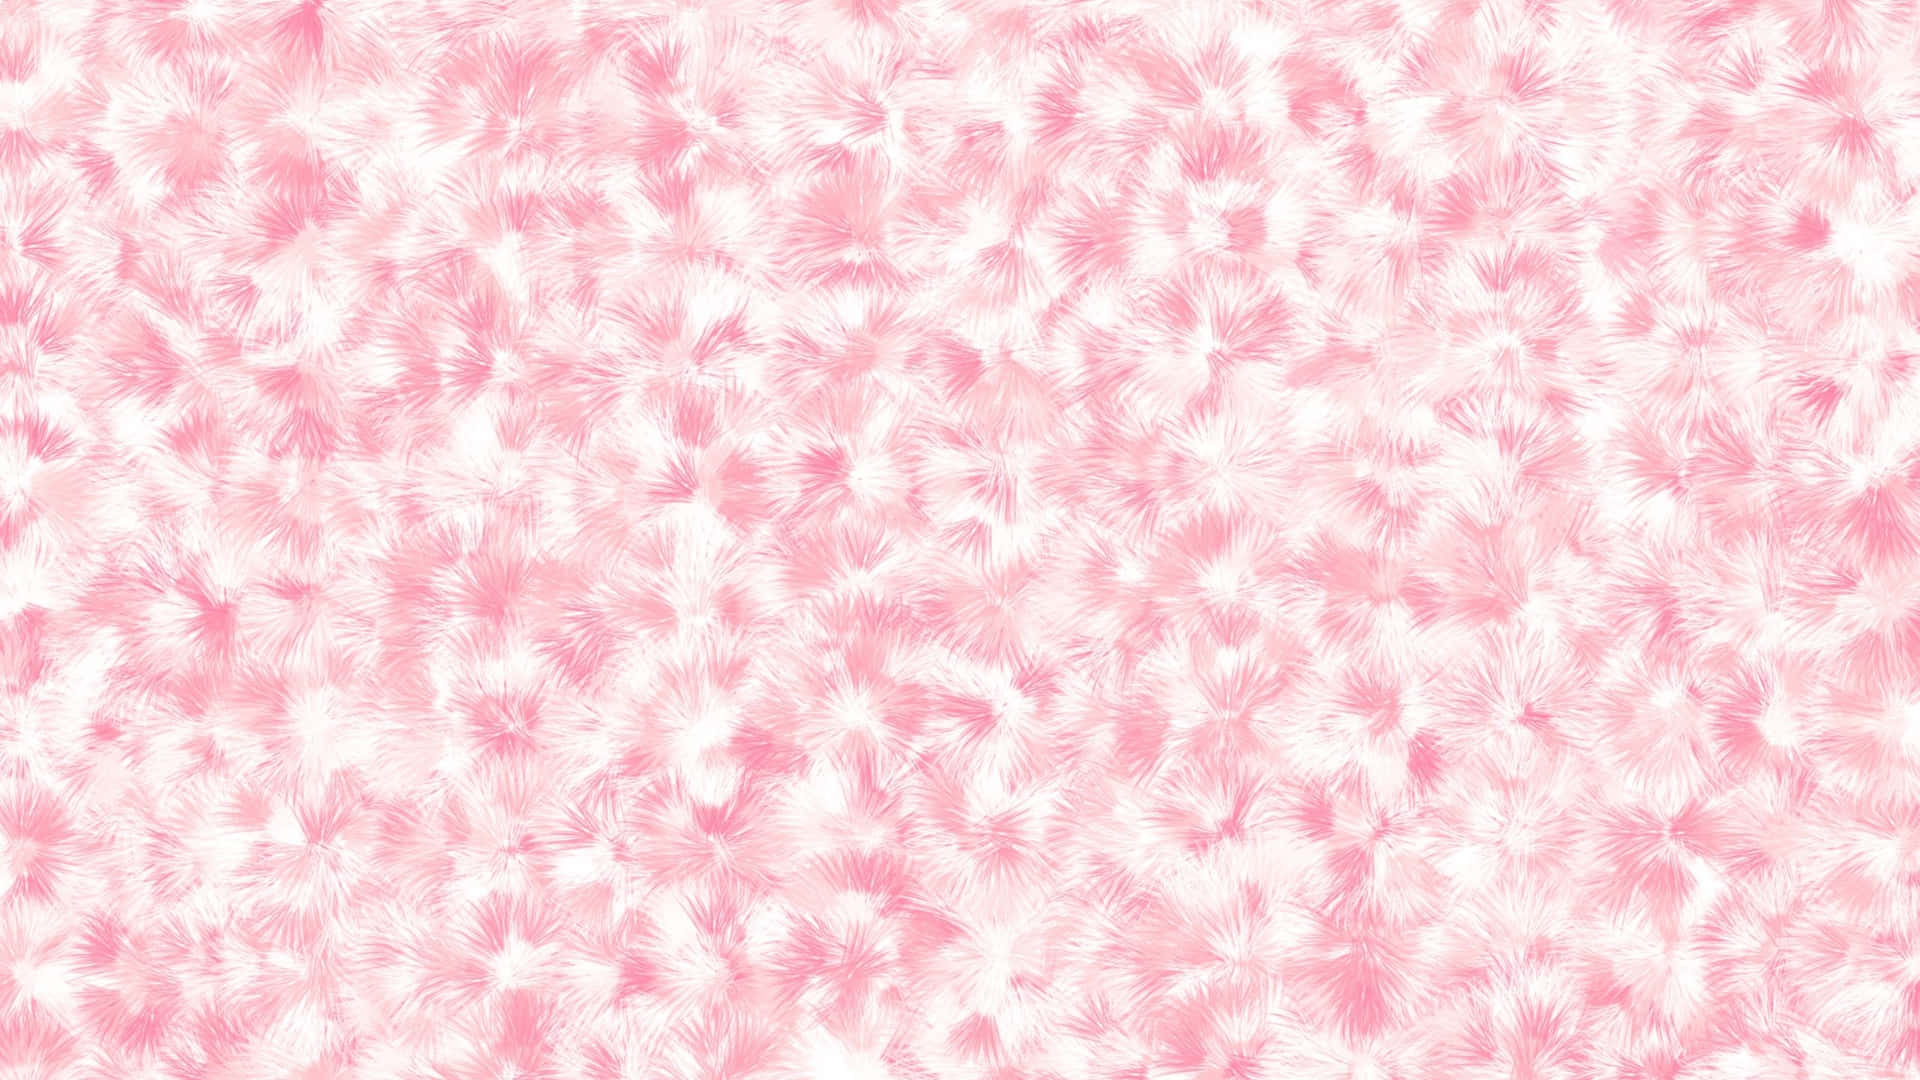 Aesthetic Computer Light Pink Feathery Patterns Wallpaper